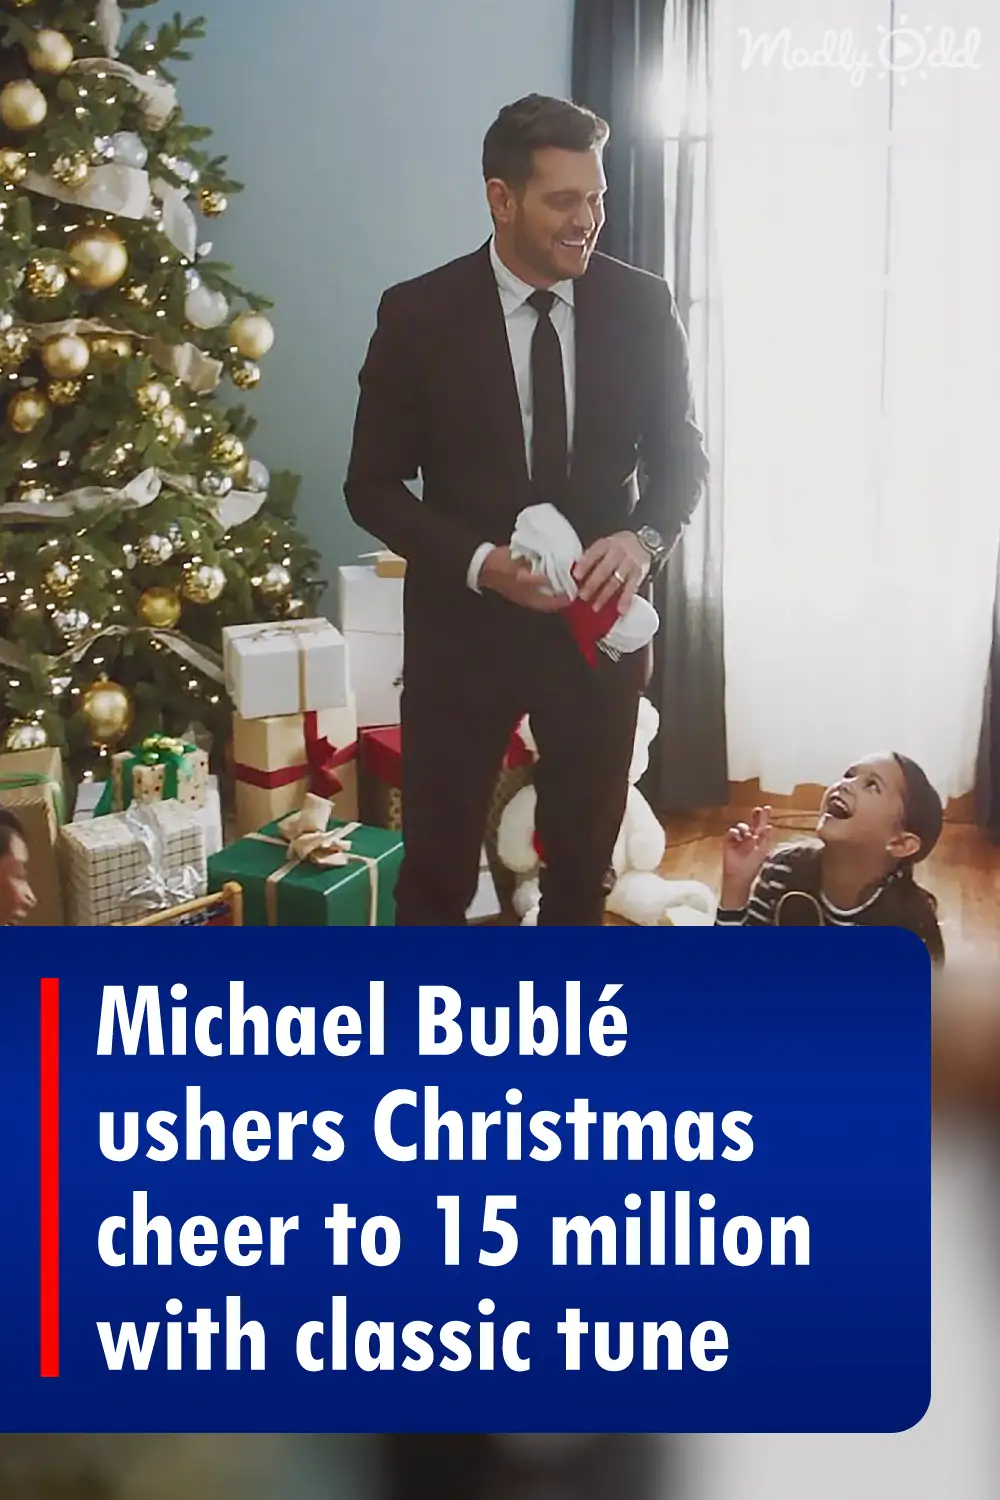 Michael Bublé ushers Christmas cheer to 15 million with classic tune